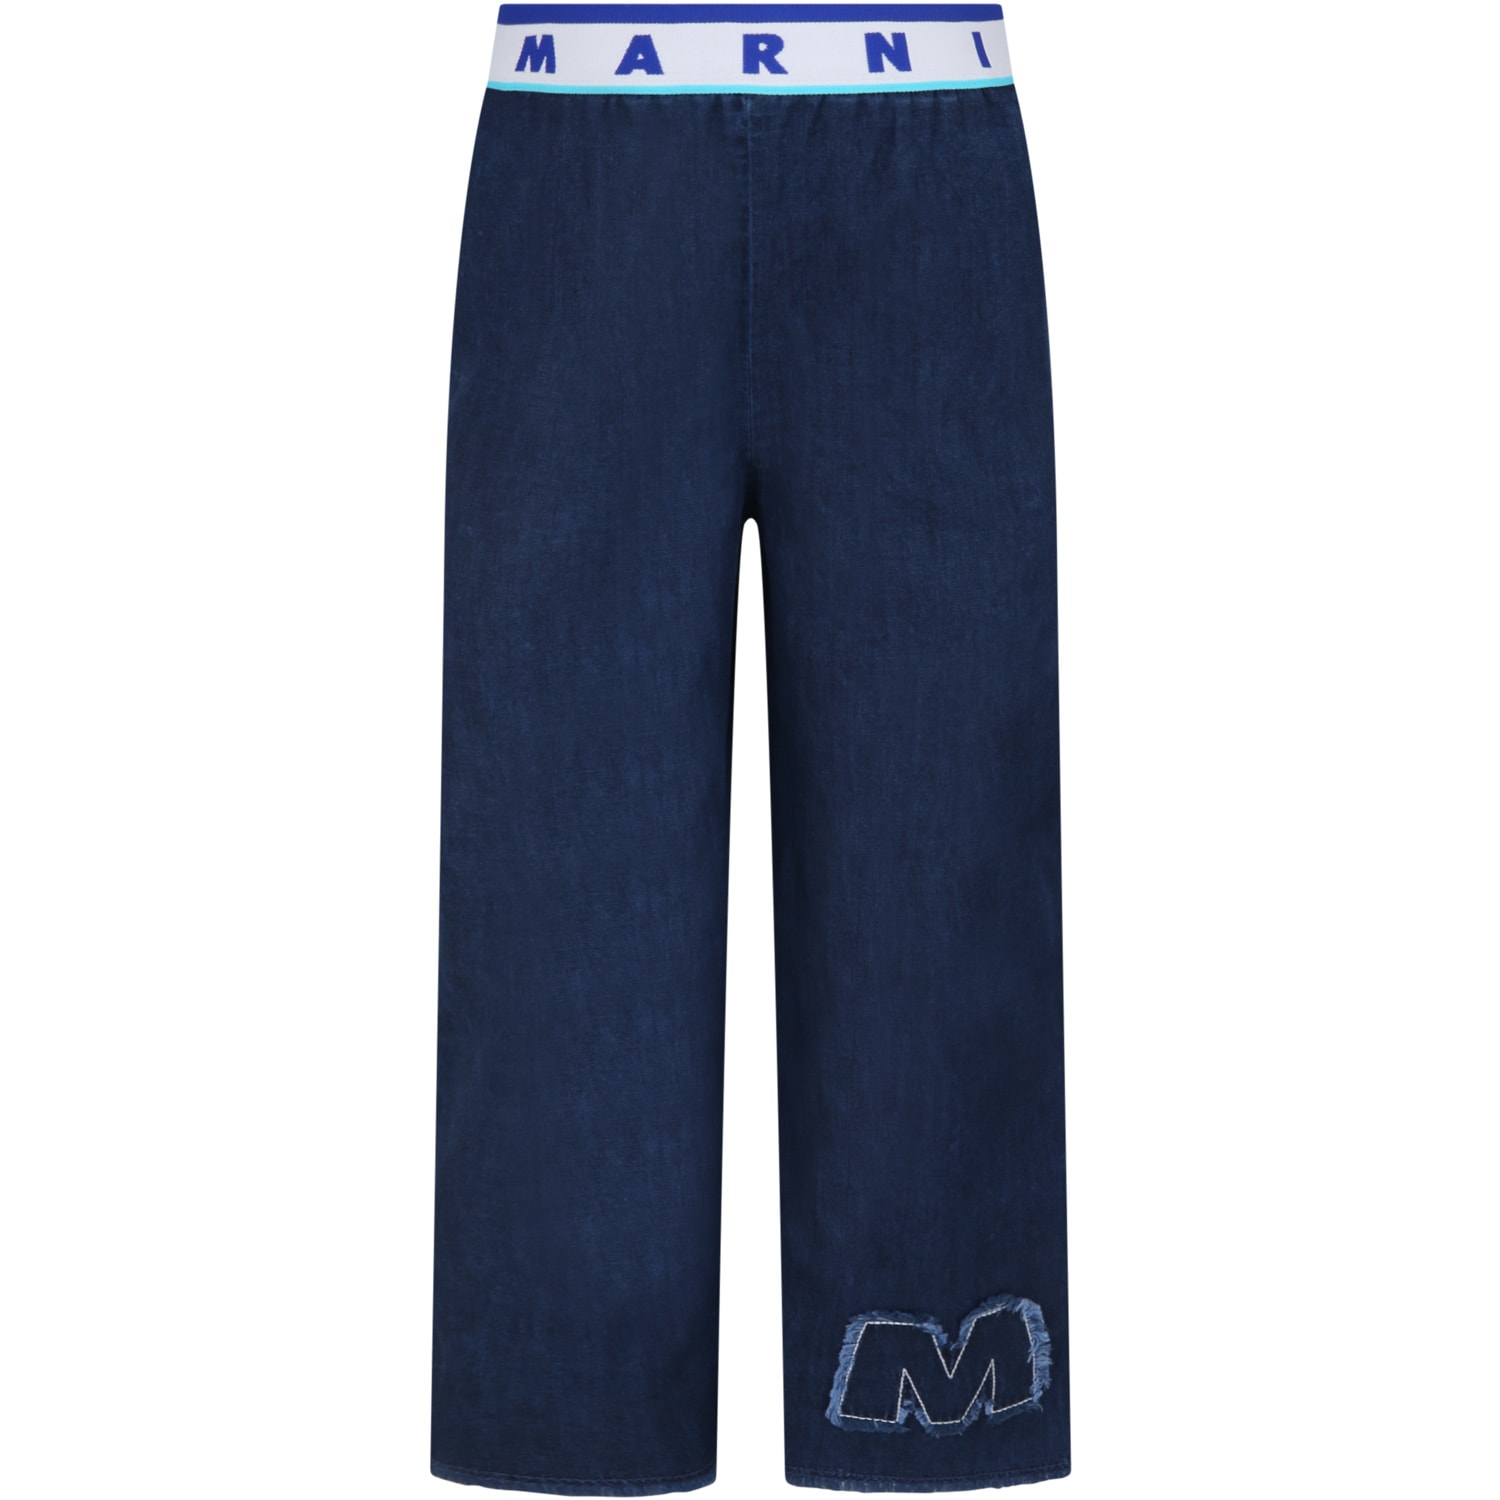 Marni Blue Trouser For Girl With Logos